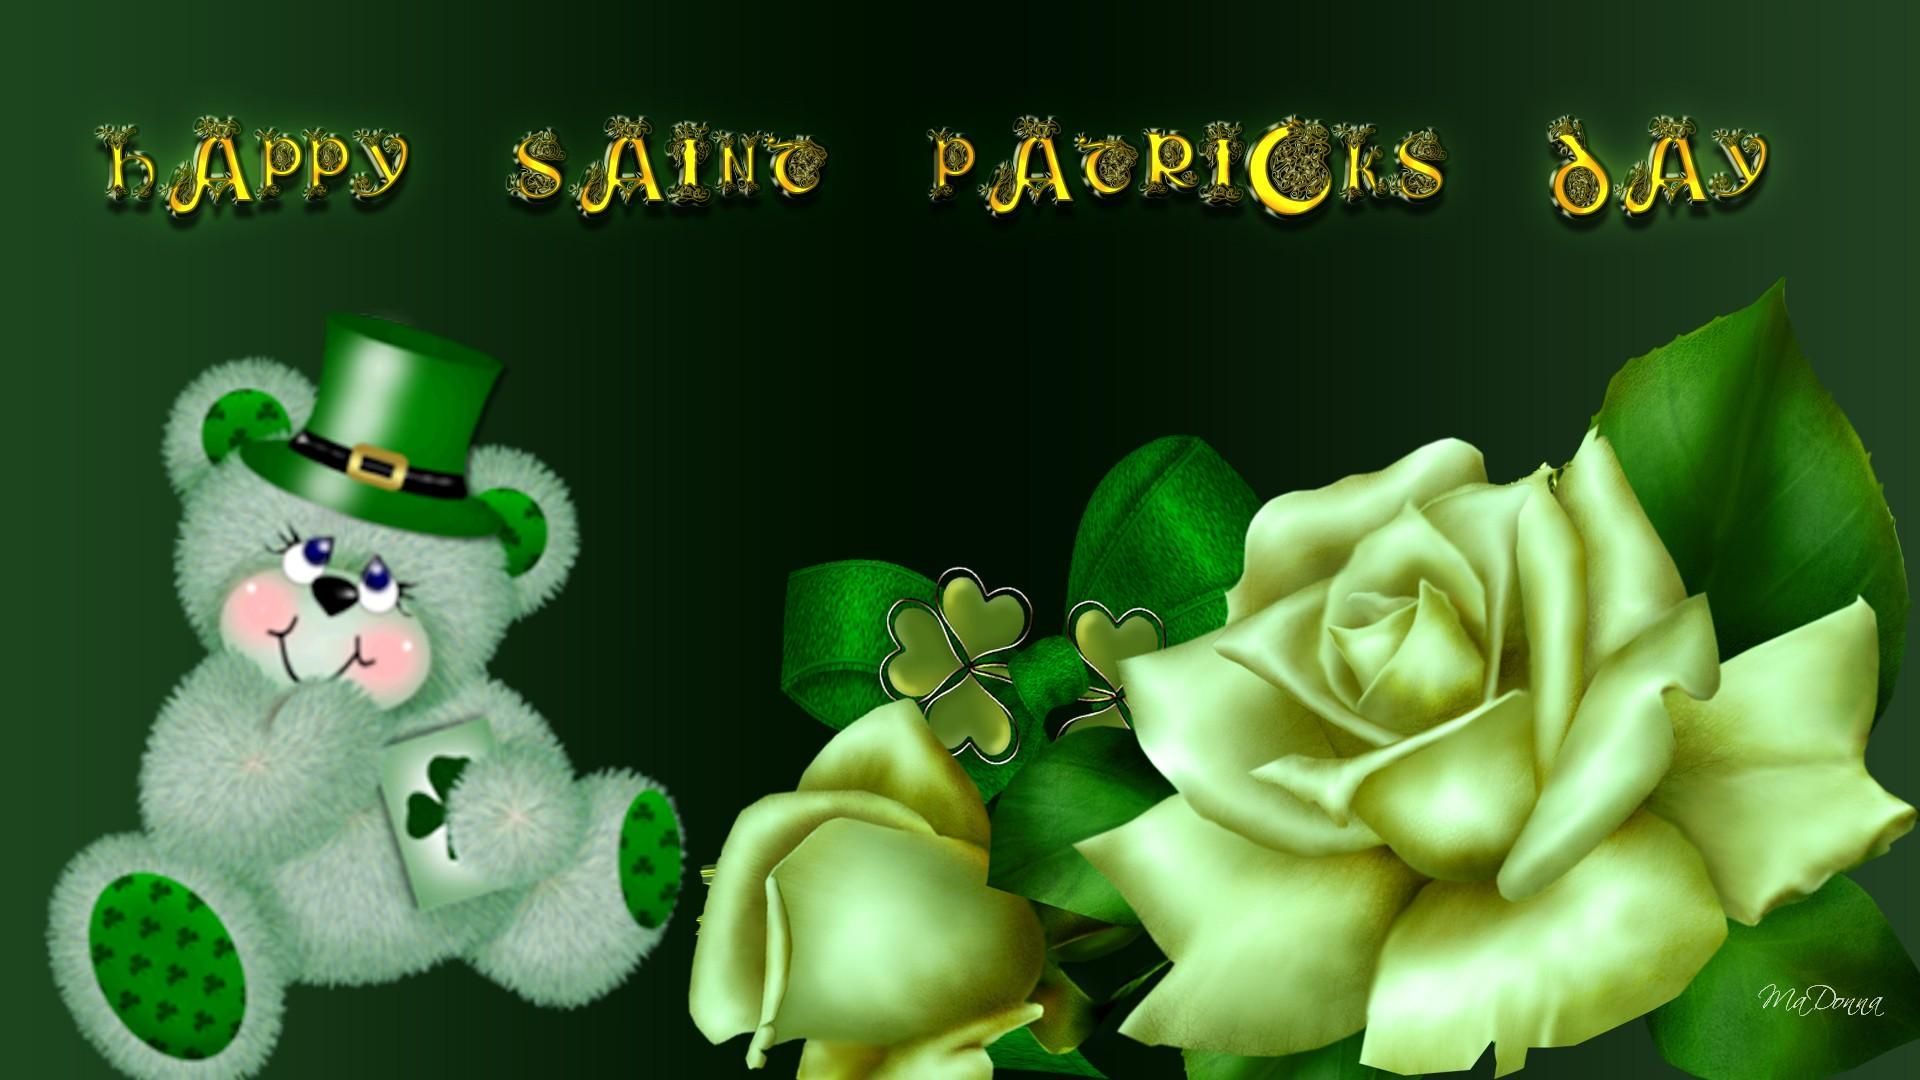 Welcome to AMAZINGIPHONE6.NET. St patricks day wallpaper, Free collage, Happy st patricks day